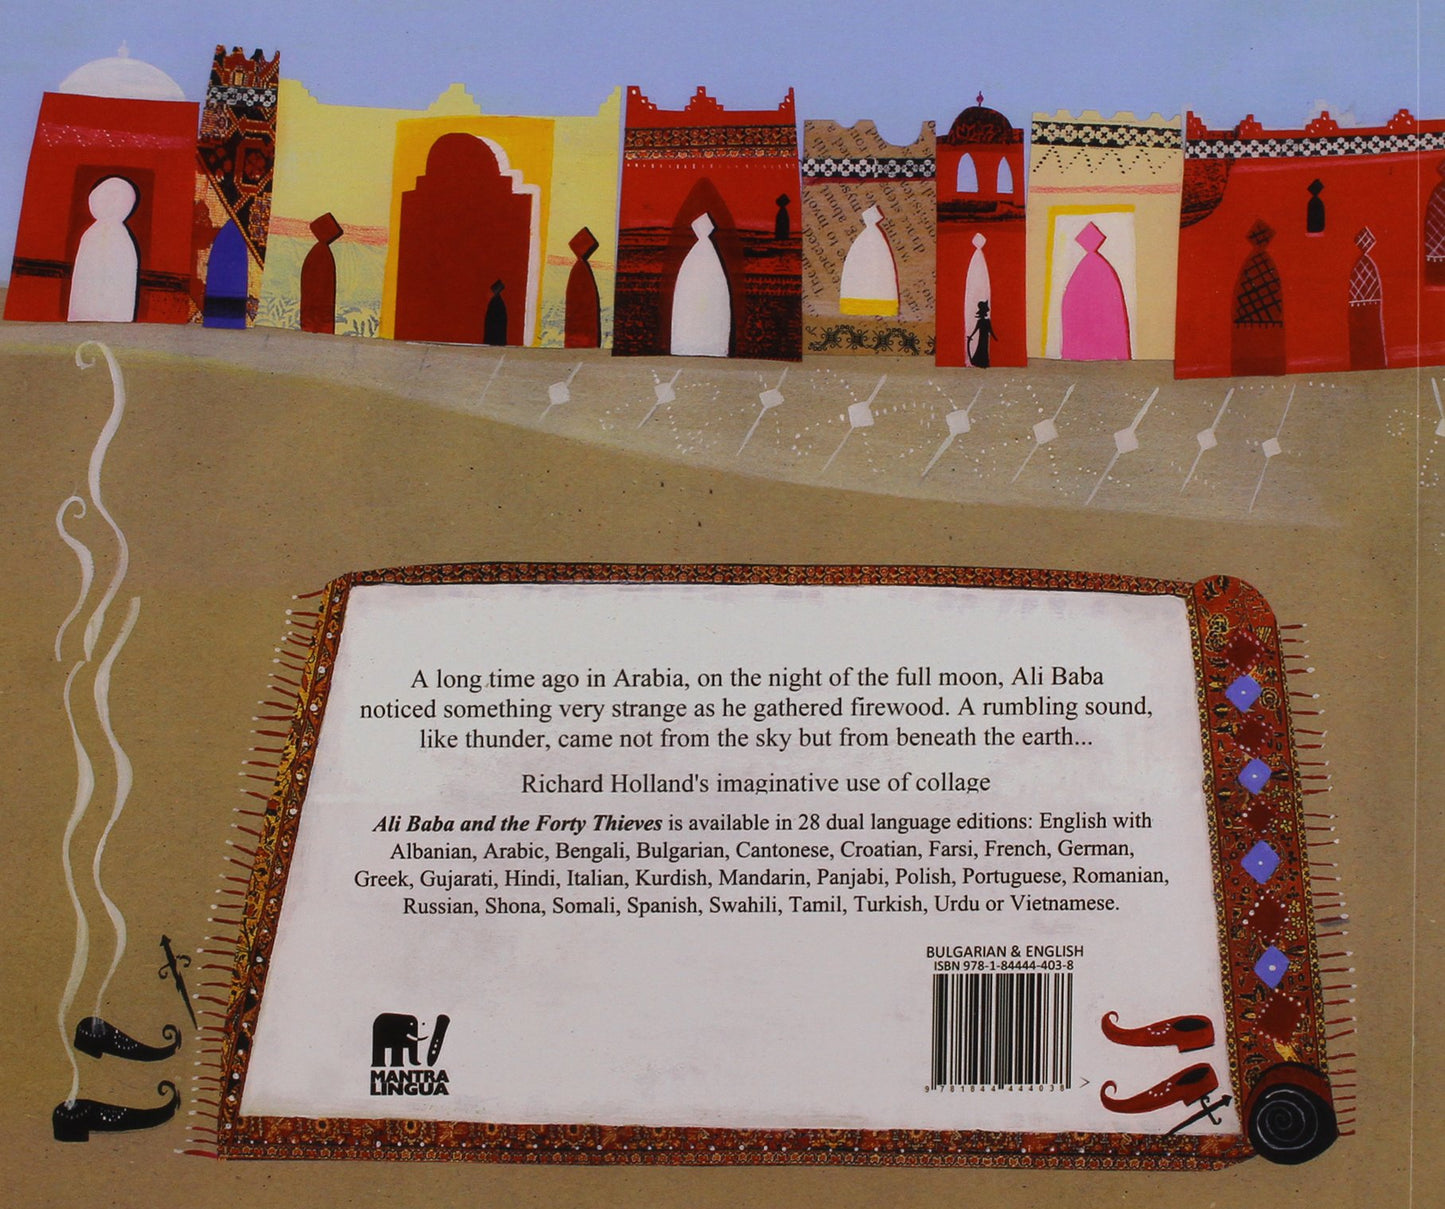 Ali Baba and the Forty Thieves by Enebor Attard & Richard Holland